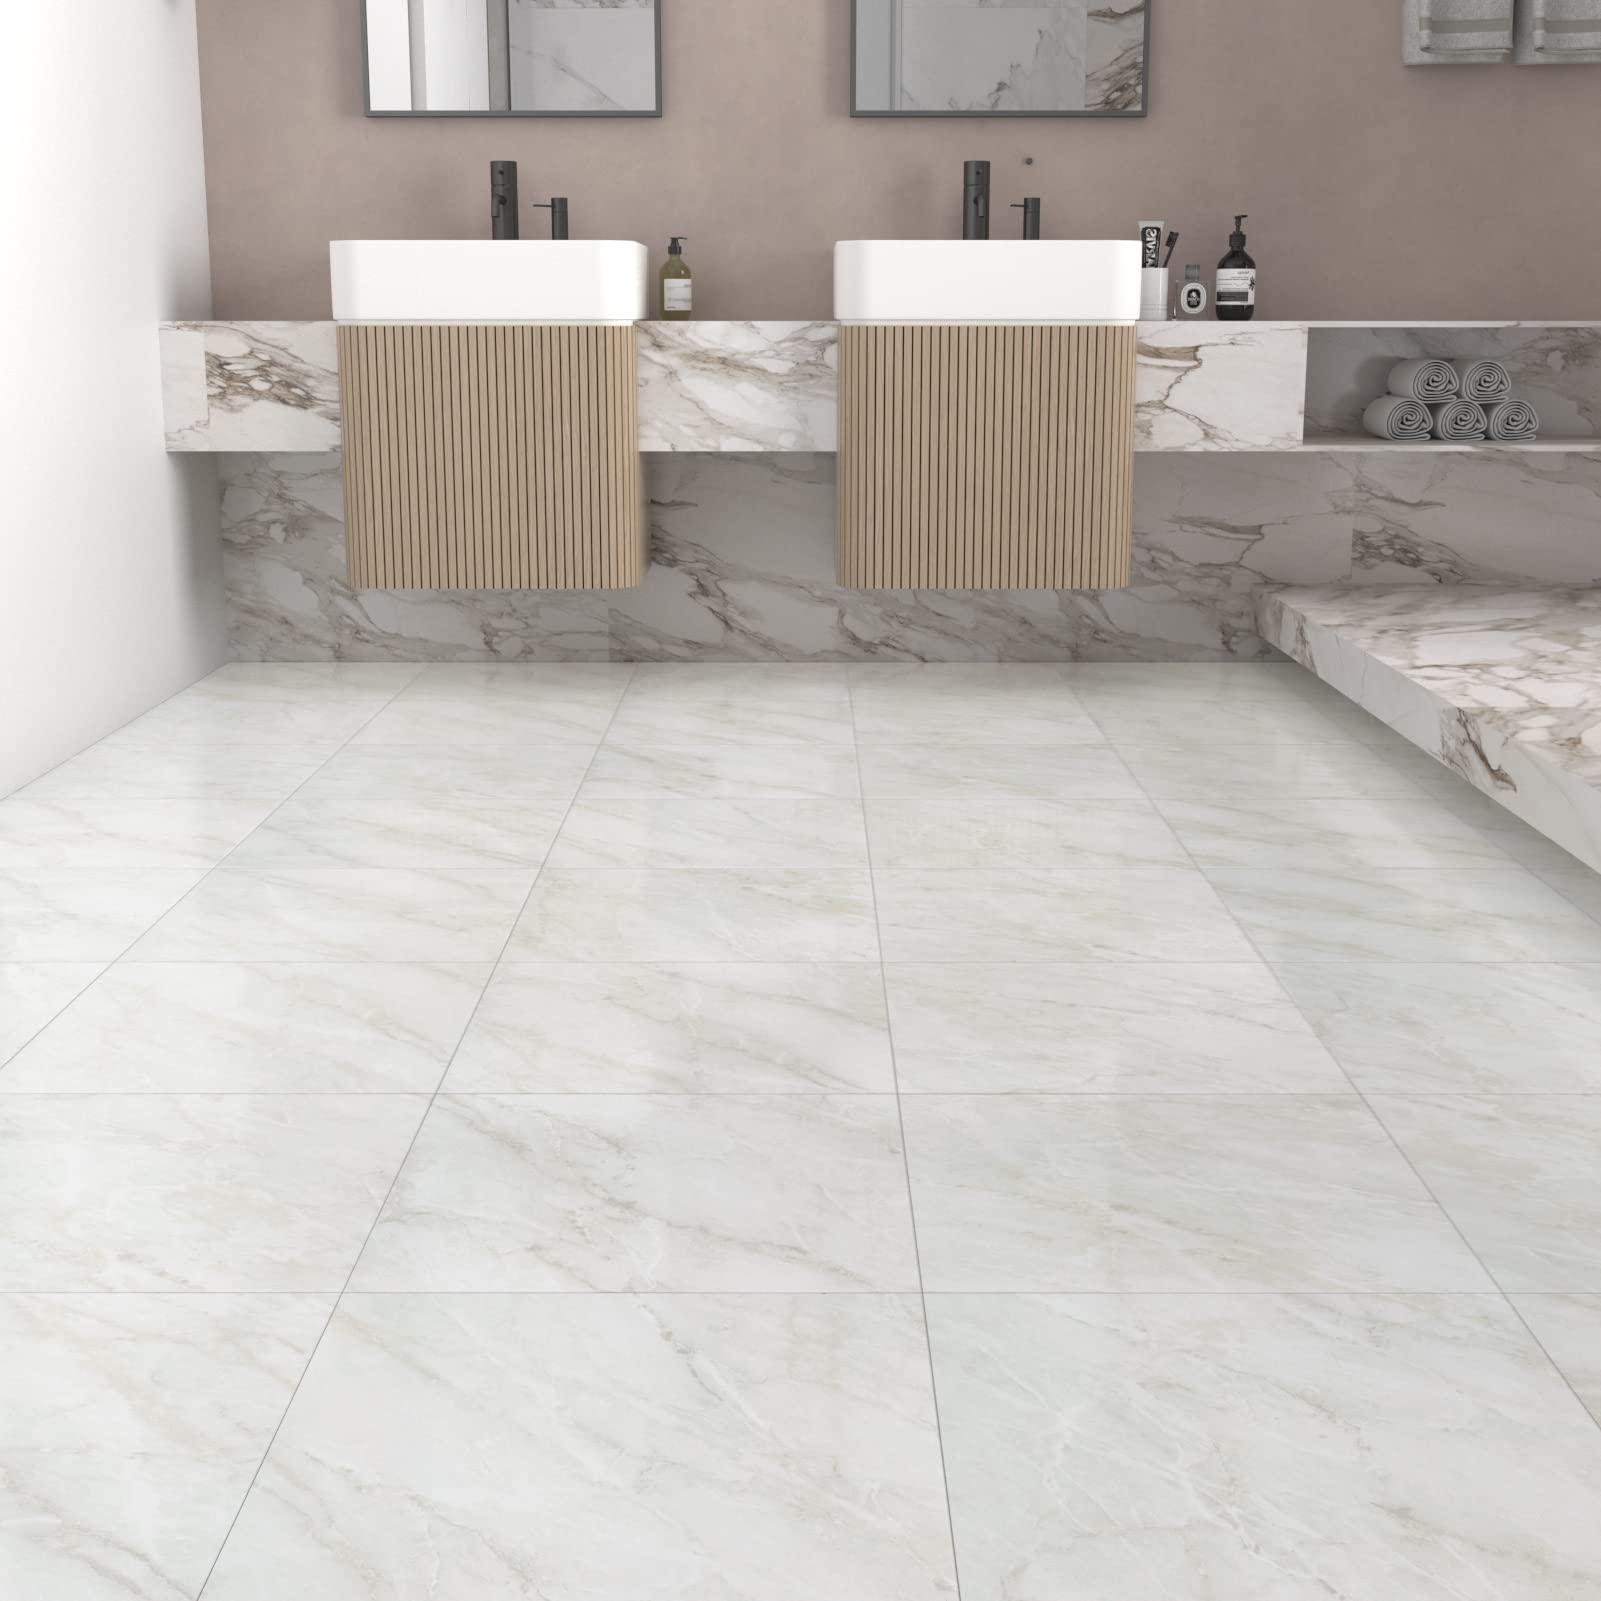 how to remove tiles from bathroom floor